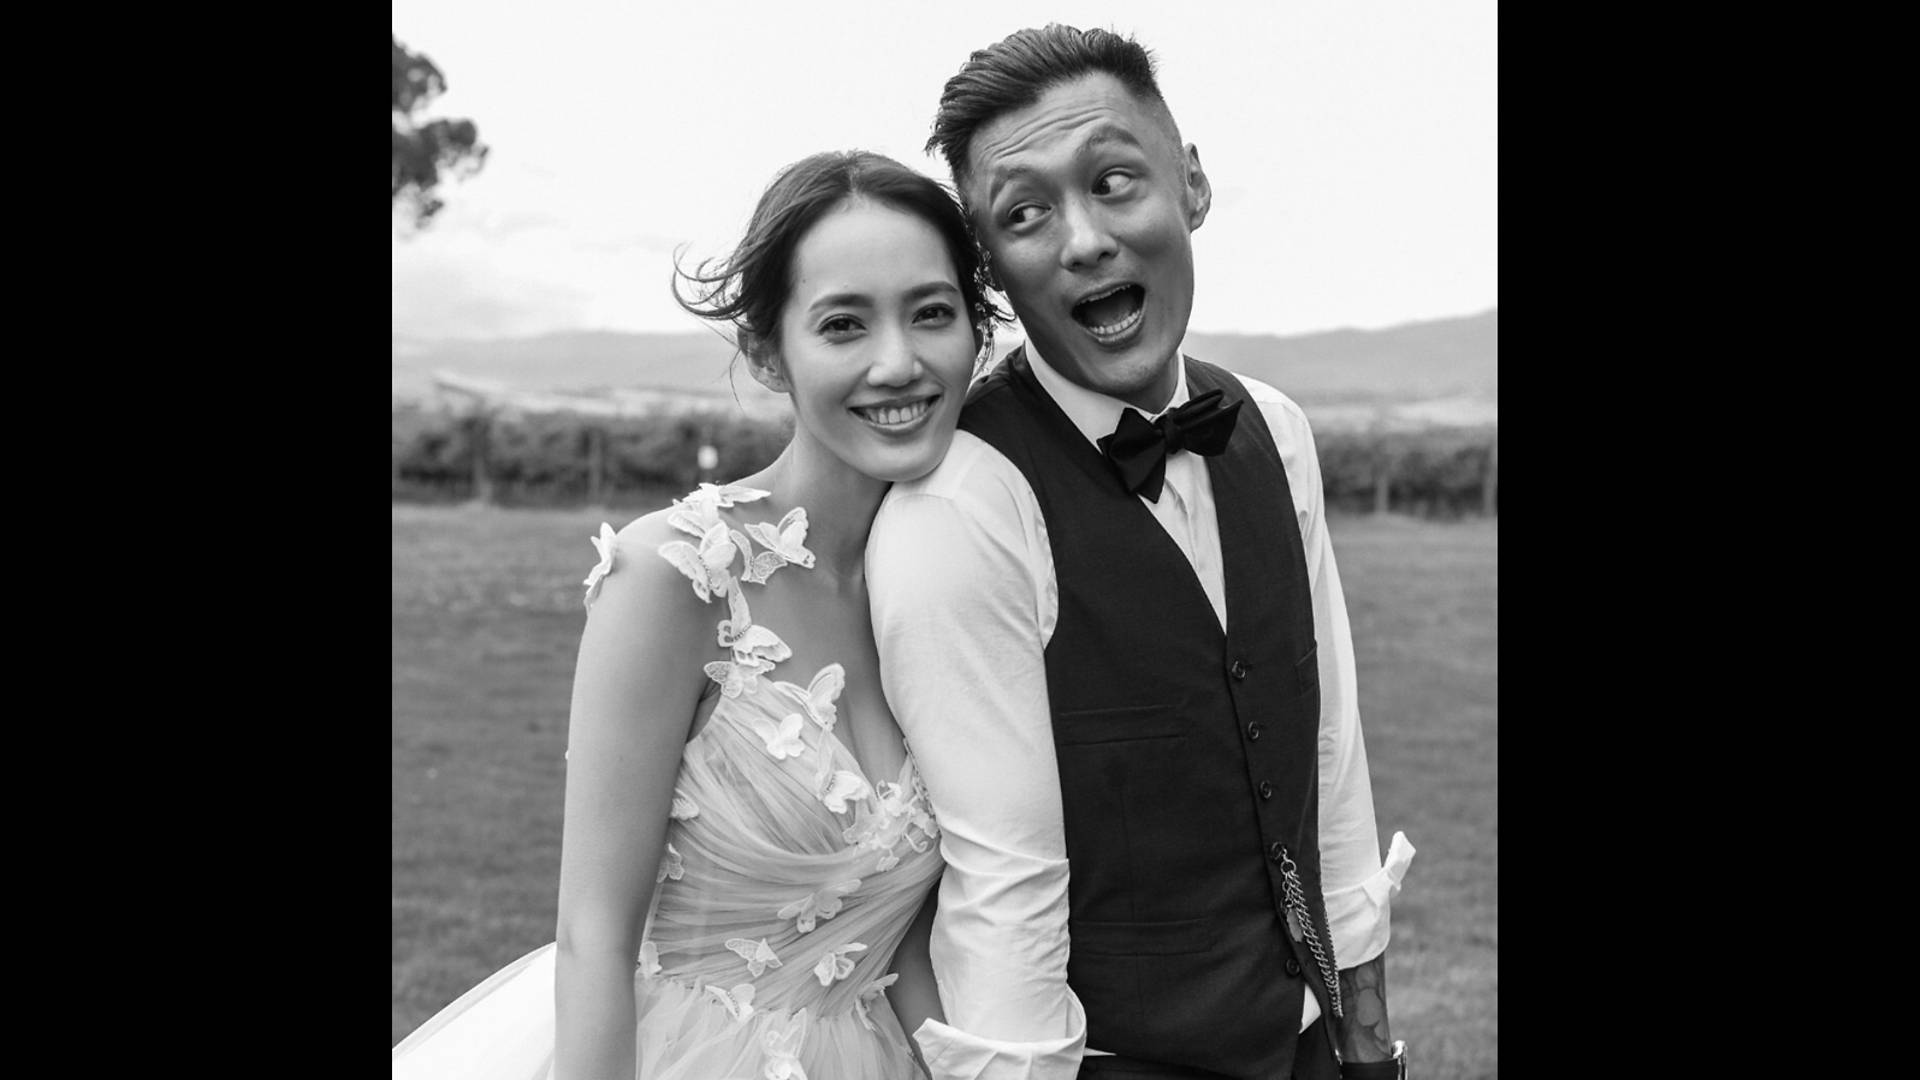 Shawn Yue confirms new relationship? - 8days